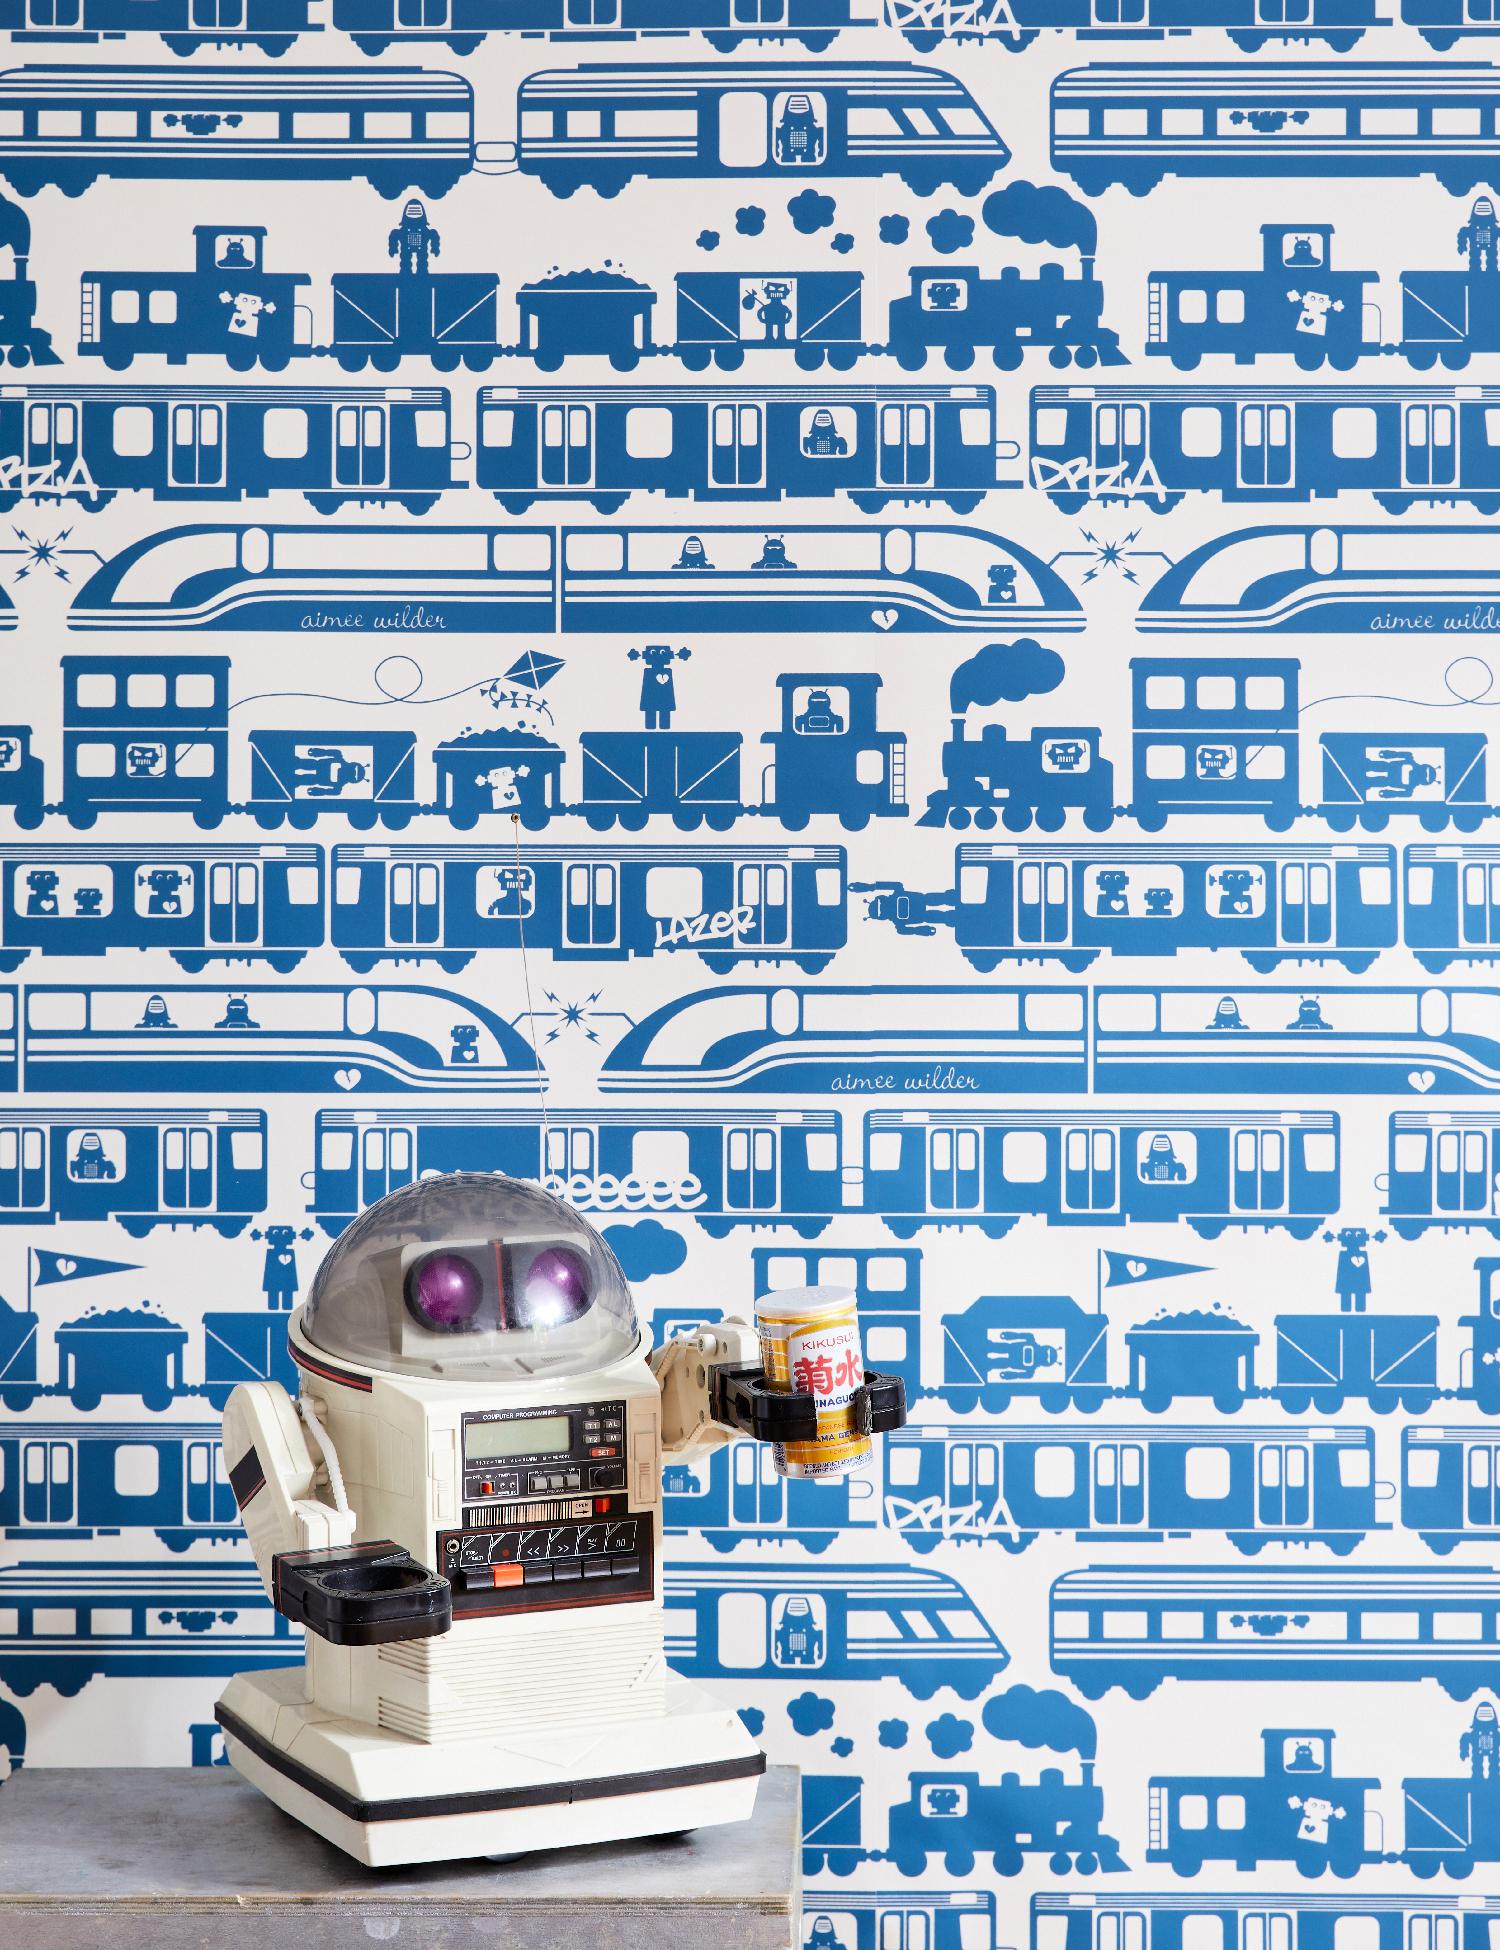 This adorable children's pattern by Aimée was inspired by trains from around the world, and incorporate her beloved robot characters!
 
Samples are available for $18 including US shipping, please message us to purchase.

Printing: Digital pigment